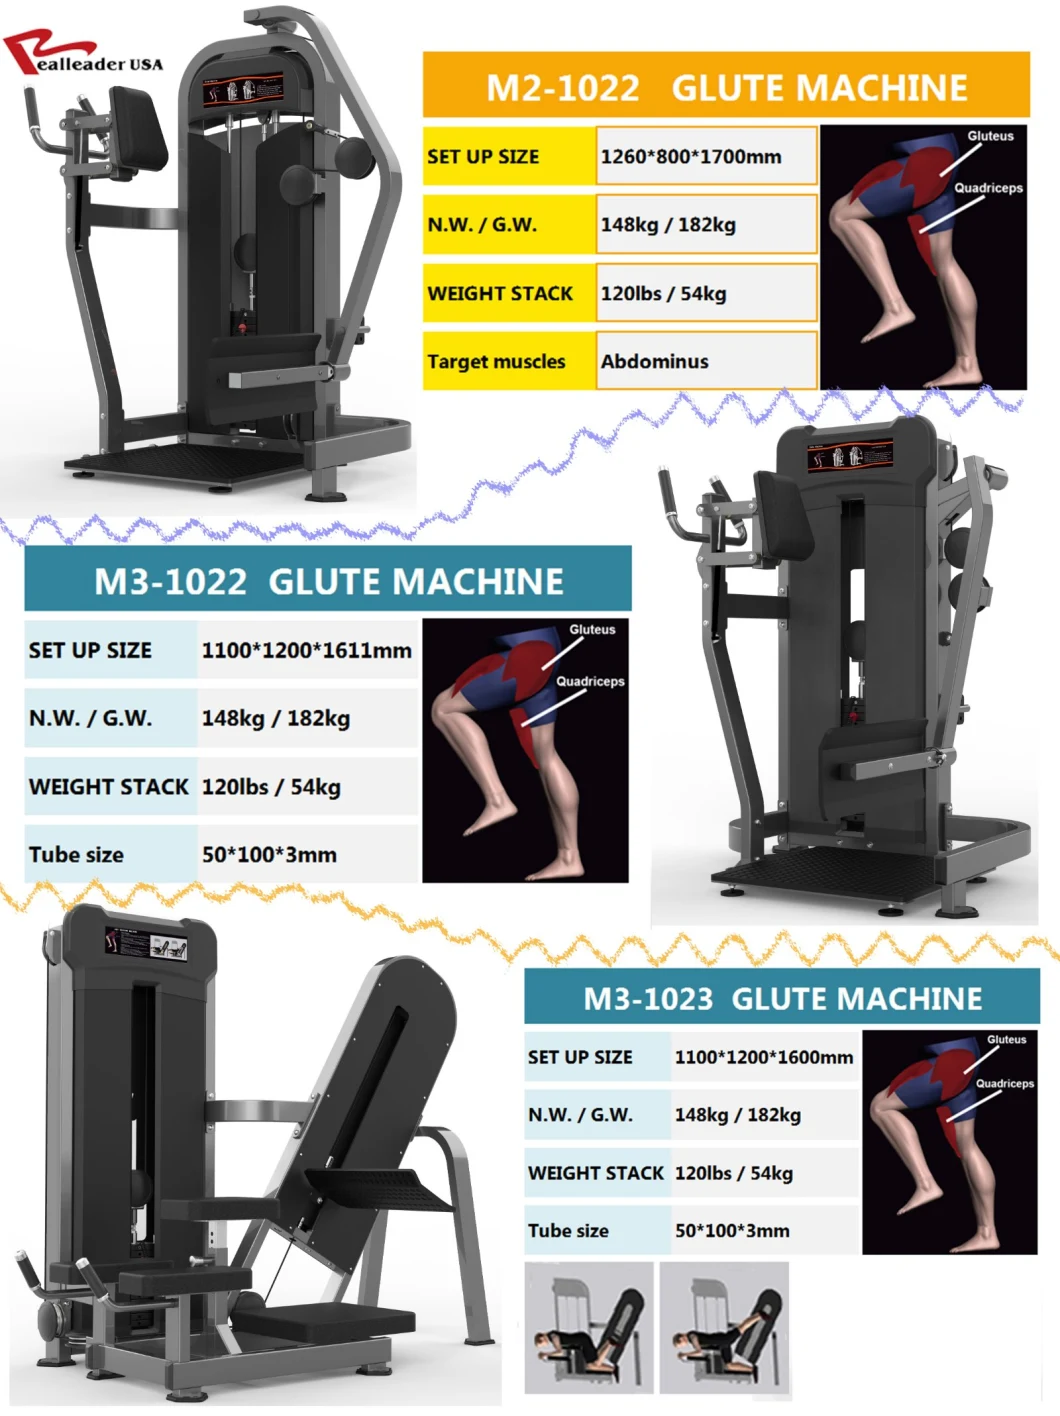 Hot Sale Pin-Loaded Gym Equipment of Glute Machine (M7-2008)